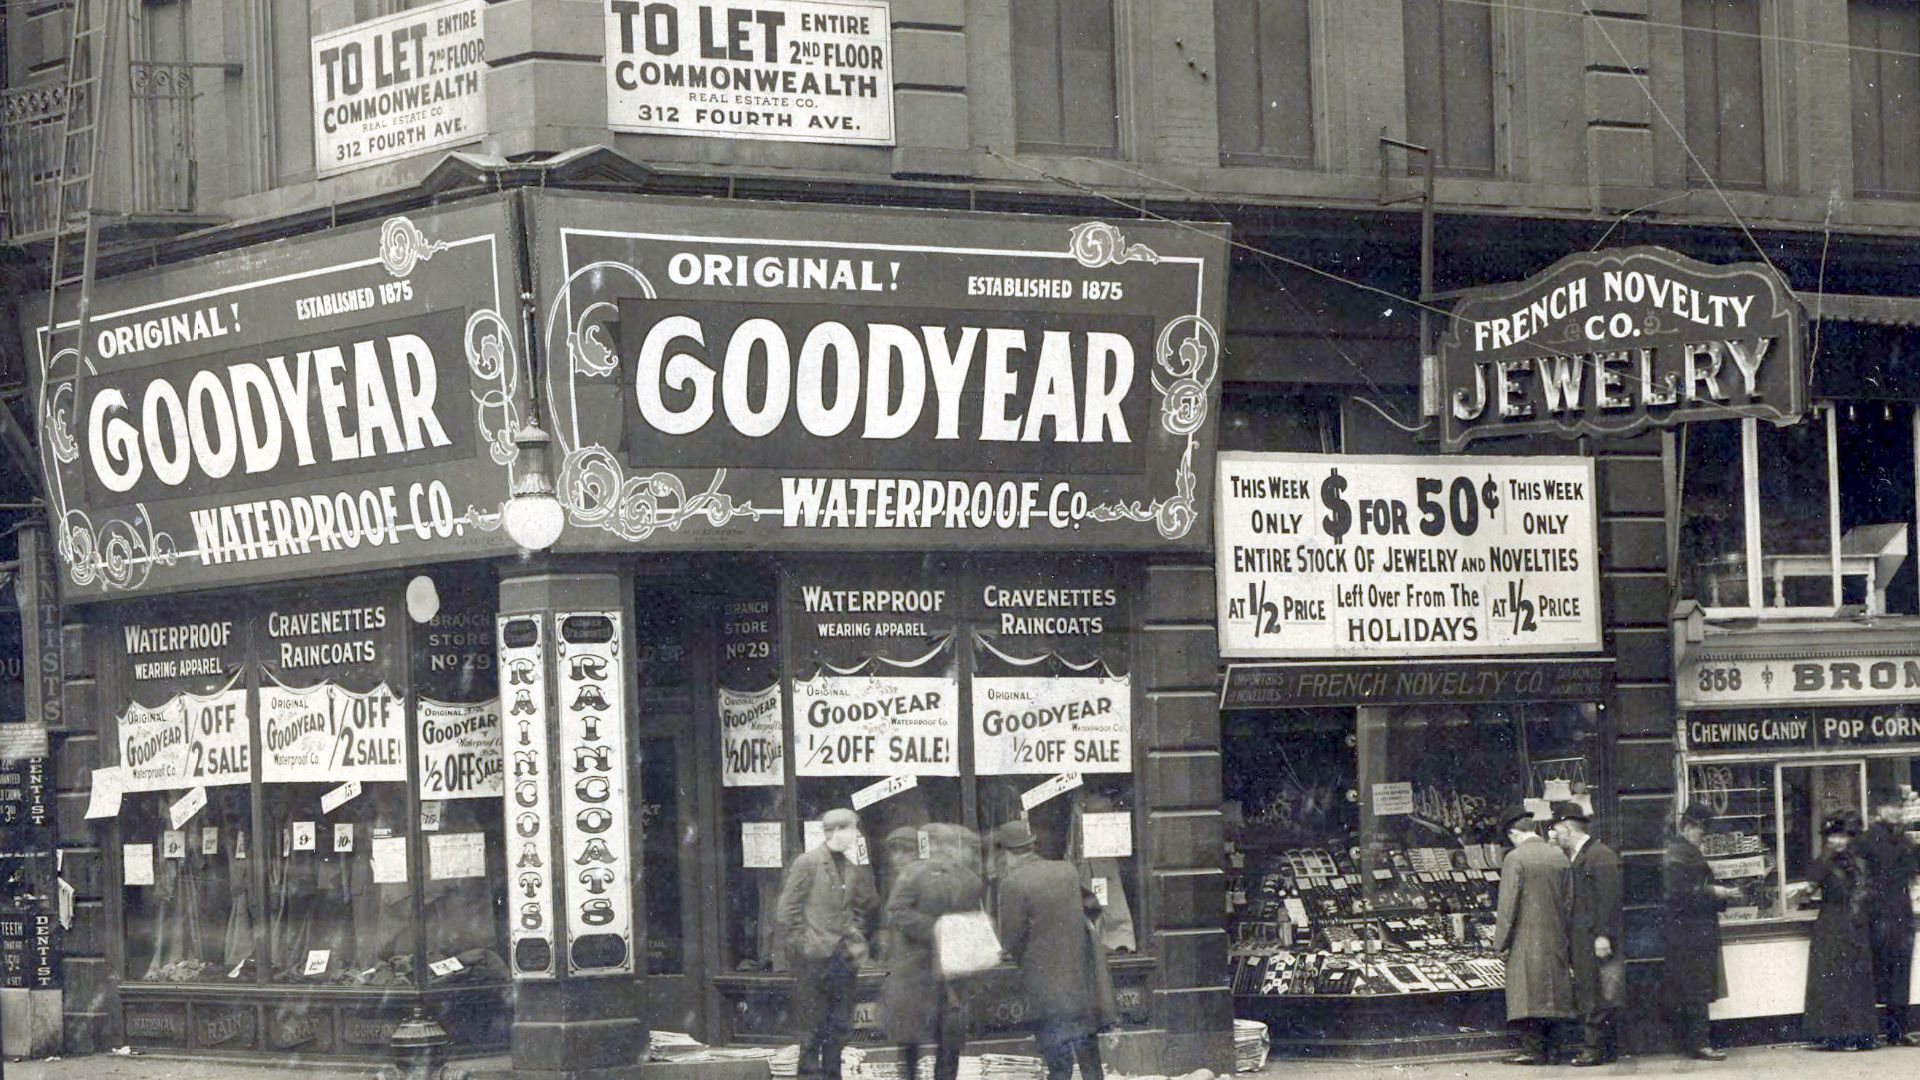 Archival image of people, shops, and signs, dominated by the corner building which houses the Goodyear Waterproof Co.